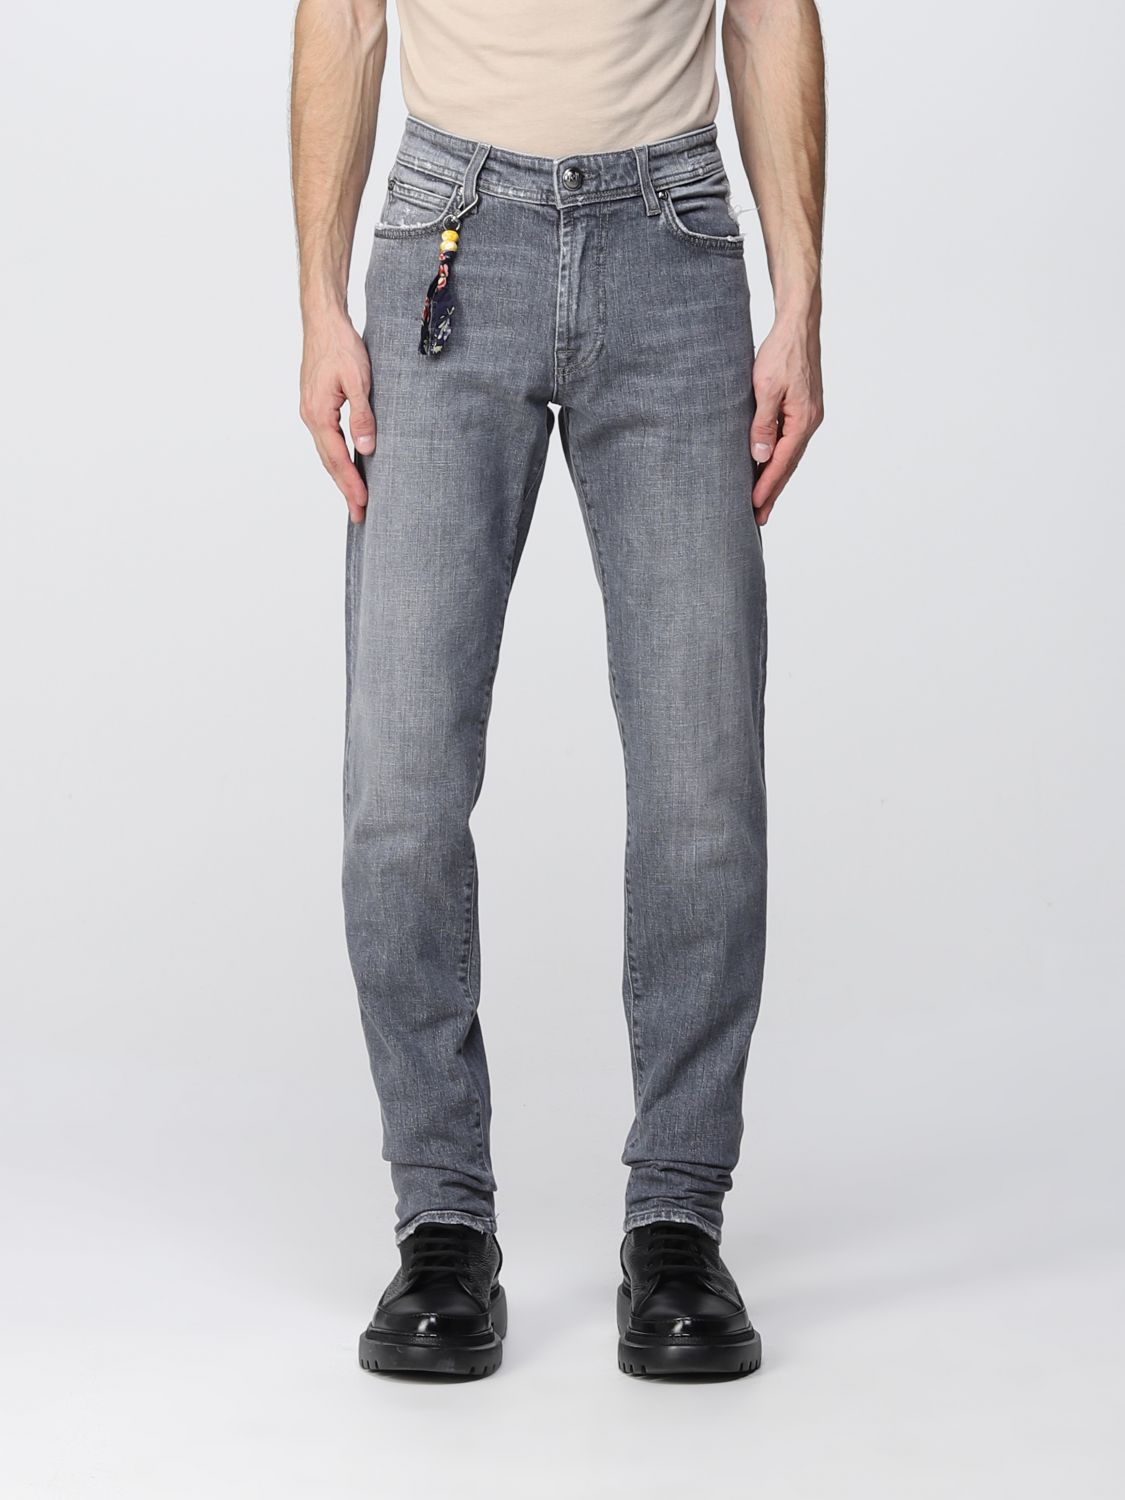 to understand steamer Sinis ROY ROGERS: jeans for man - Grey | Roy Rogers jeans RSU016G0202047 online  on GIGLIO.COM